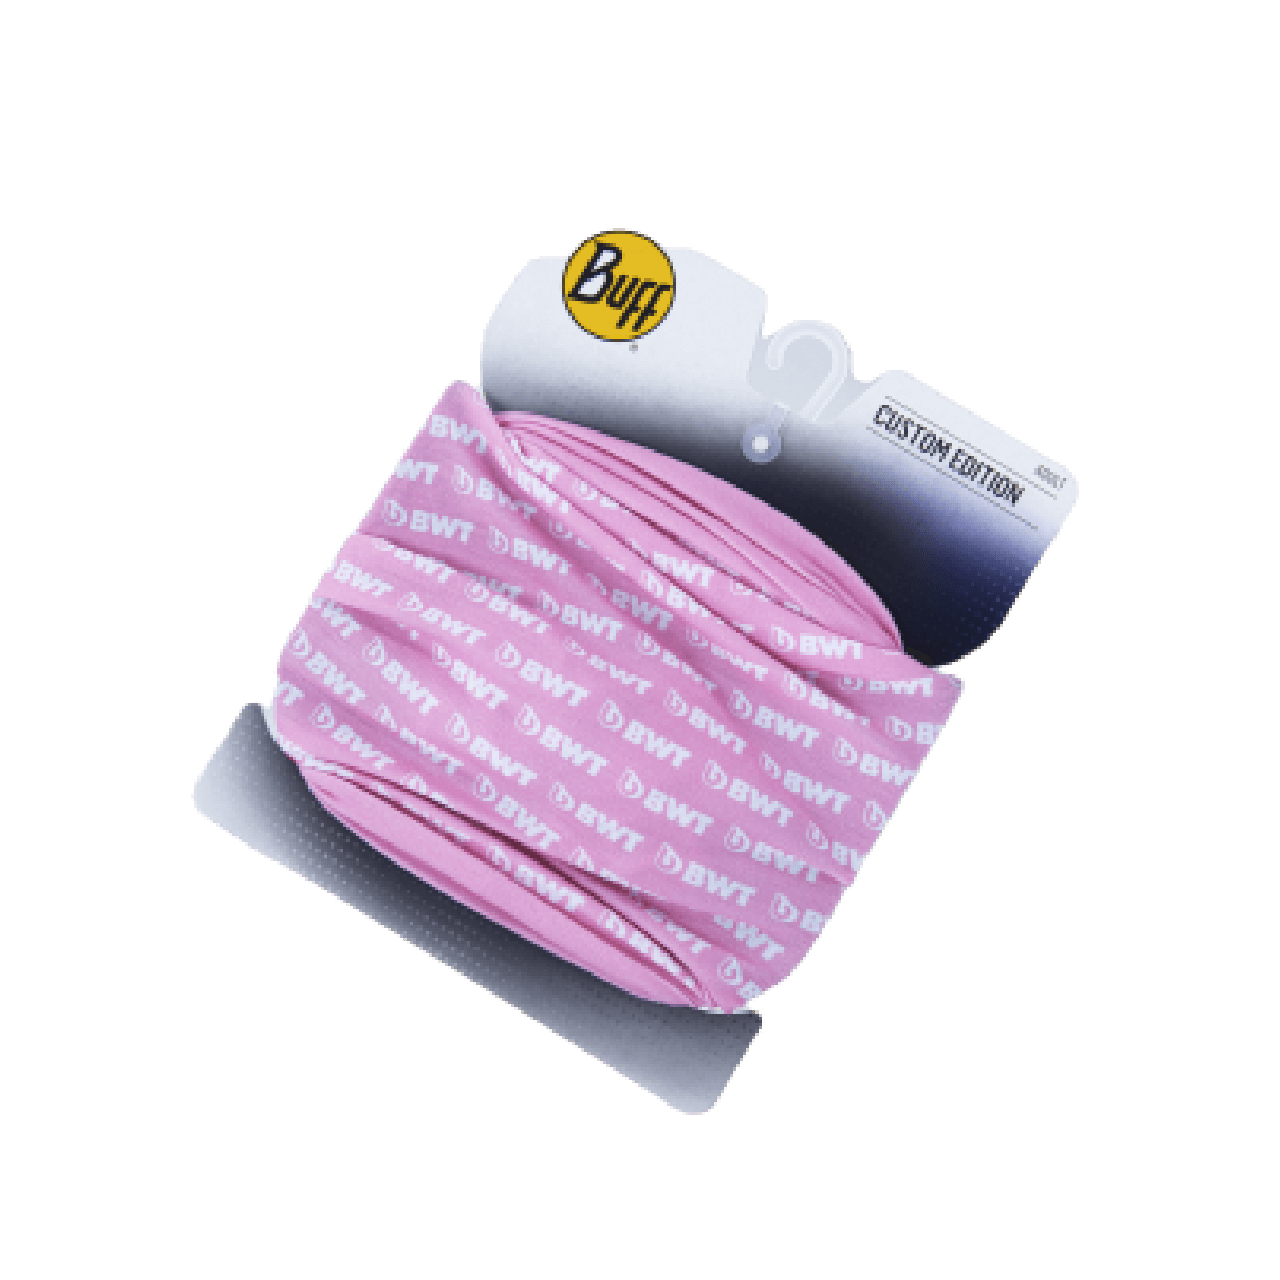 BWT BUFF® multifunctional scarf in pink with white BWT logo